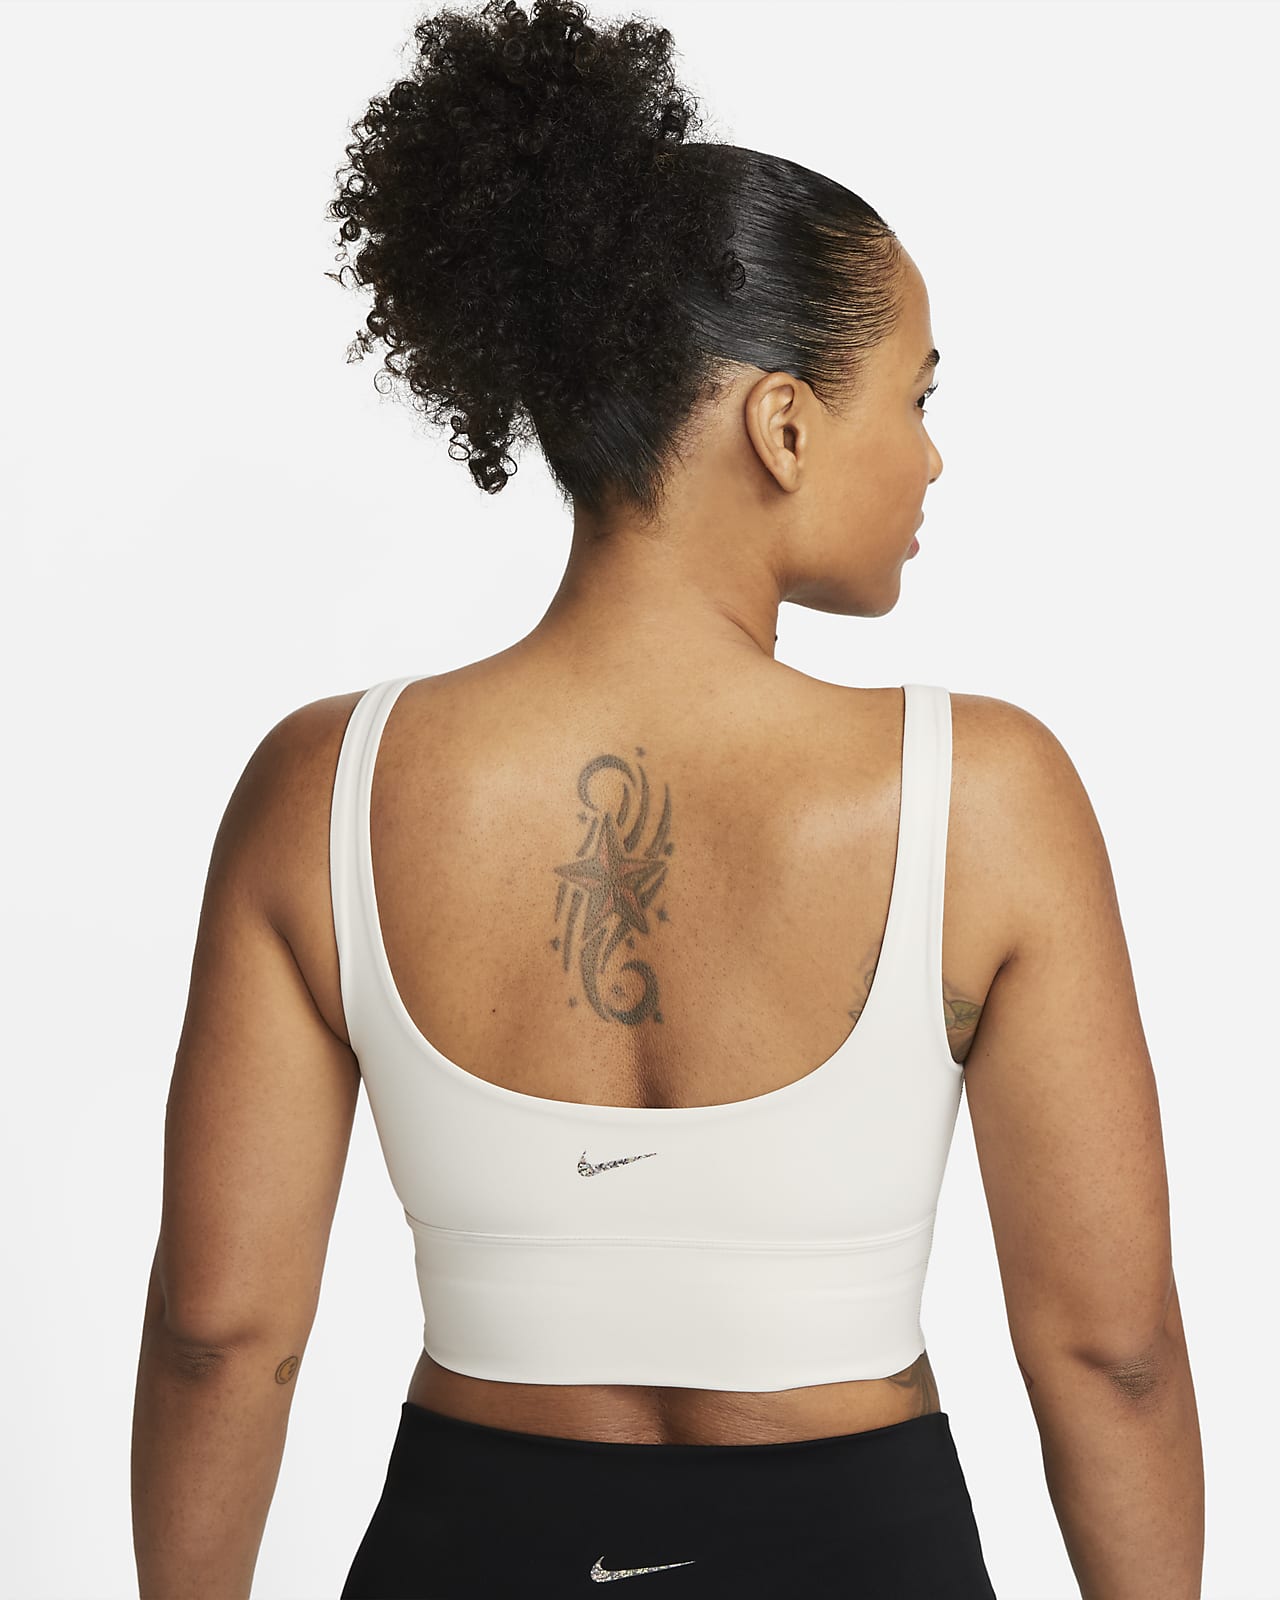 https://static.nike.com/a/images/t_PDP_1280_v1/f_auto,q_auto:eco/60d1e93a-6af2-41cb-b0c5-421e0d21fb29/zenvy-womens-light-support-non-padded-longline-sports-bra-bDS7N4.png